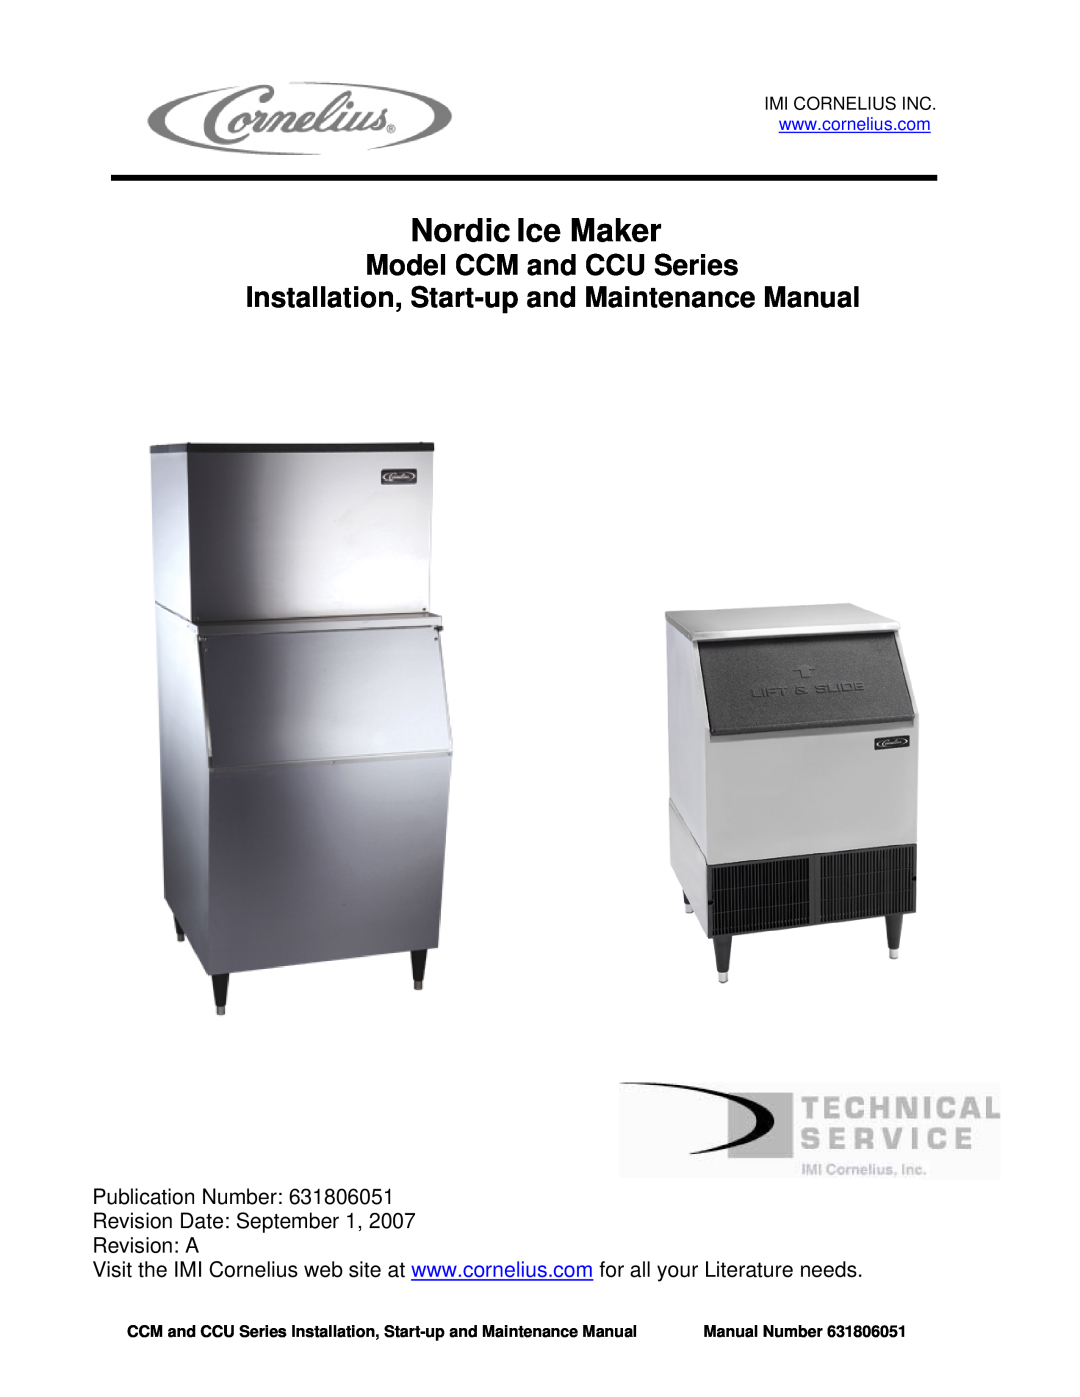 Cornelius CCM CCU manual Publication Number Revision Date September, Revision A, Nordic Ice Maker, Manual Number 